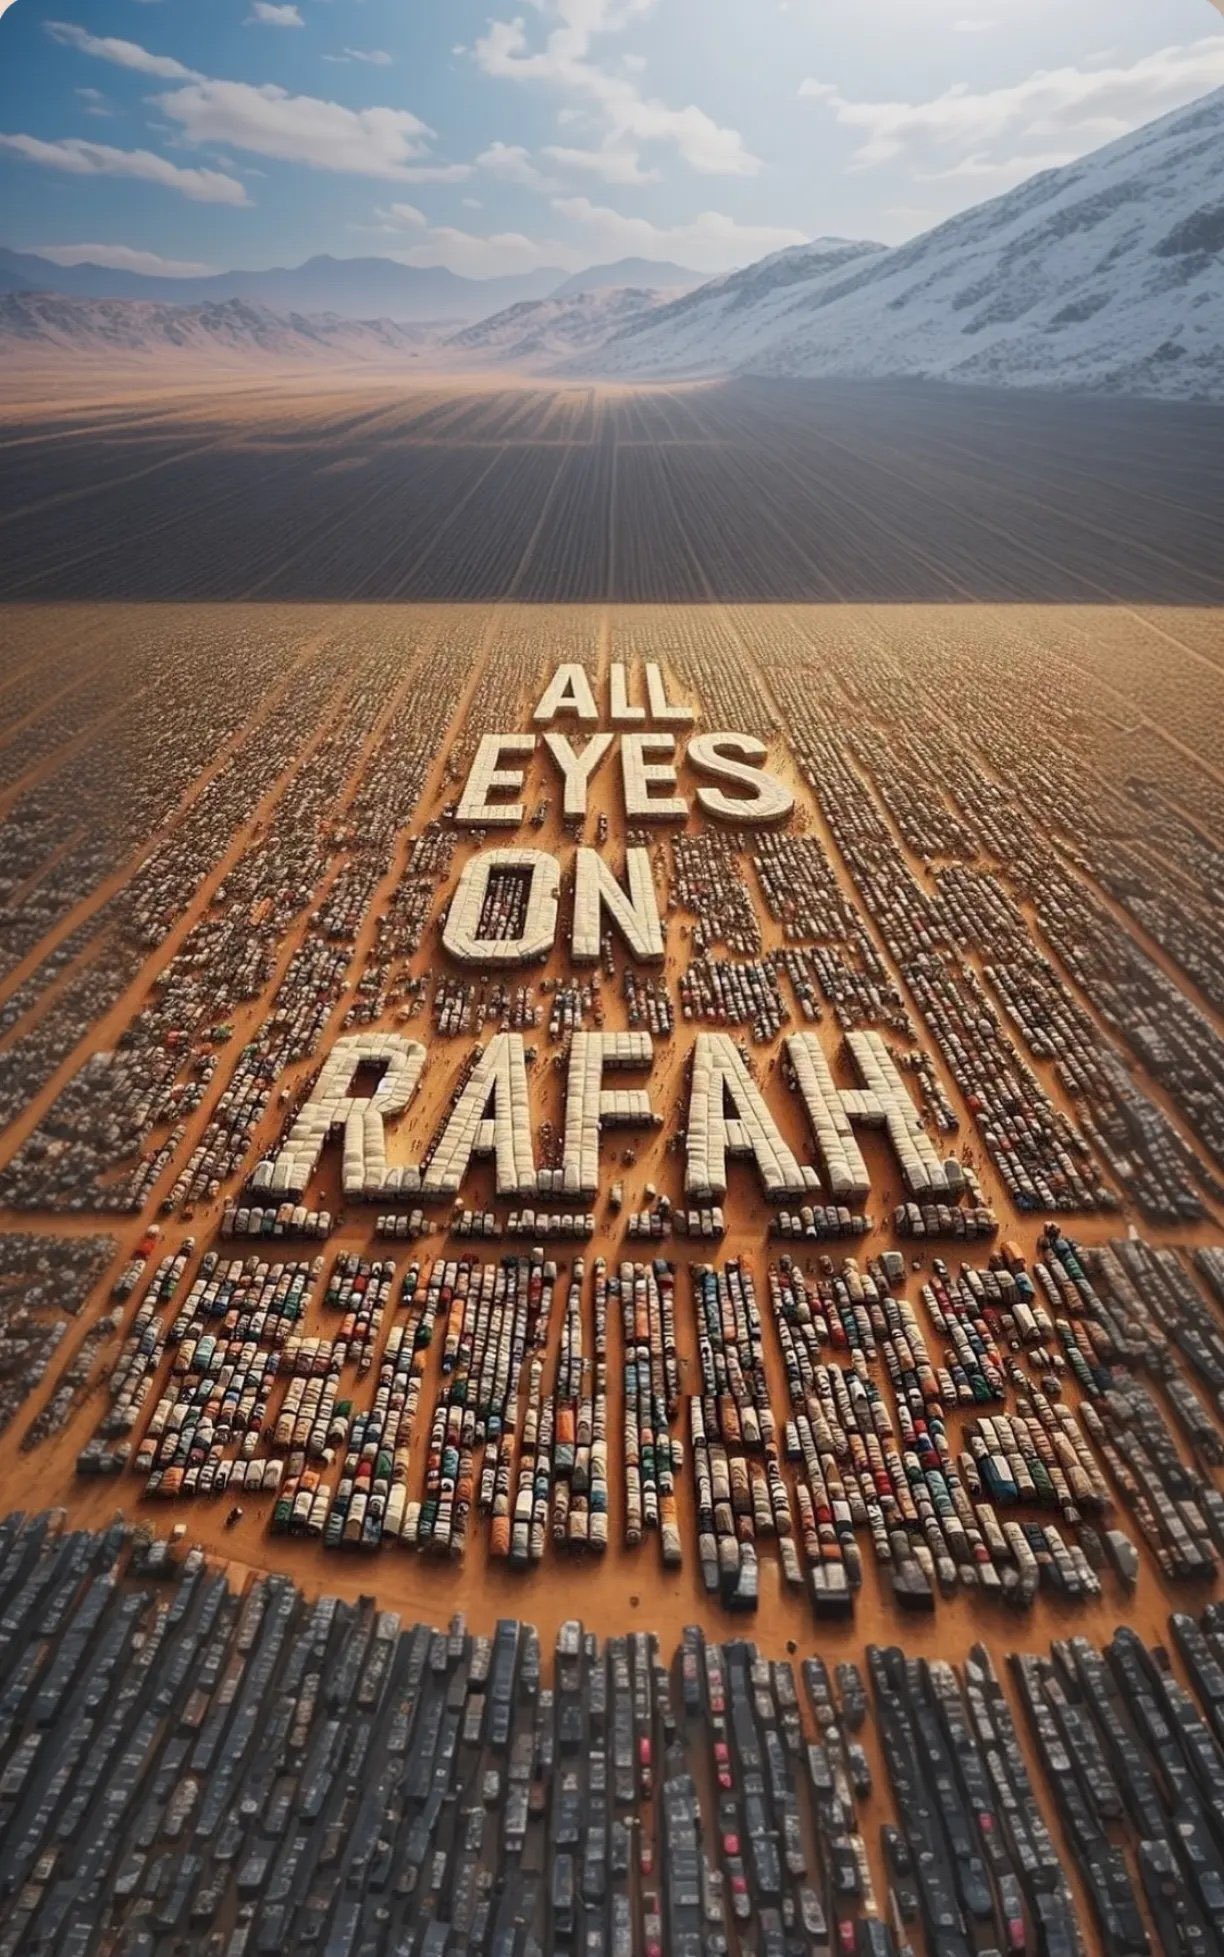 Why Indian Celebs who prefer to remain silent on issues related to their own country started posting hashtag “All Eyes On Rafah”suddenly?